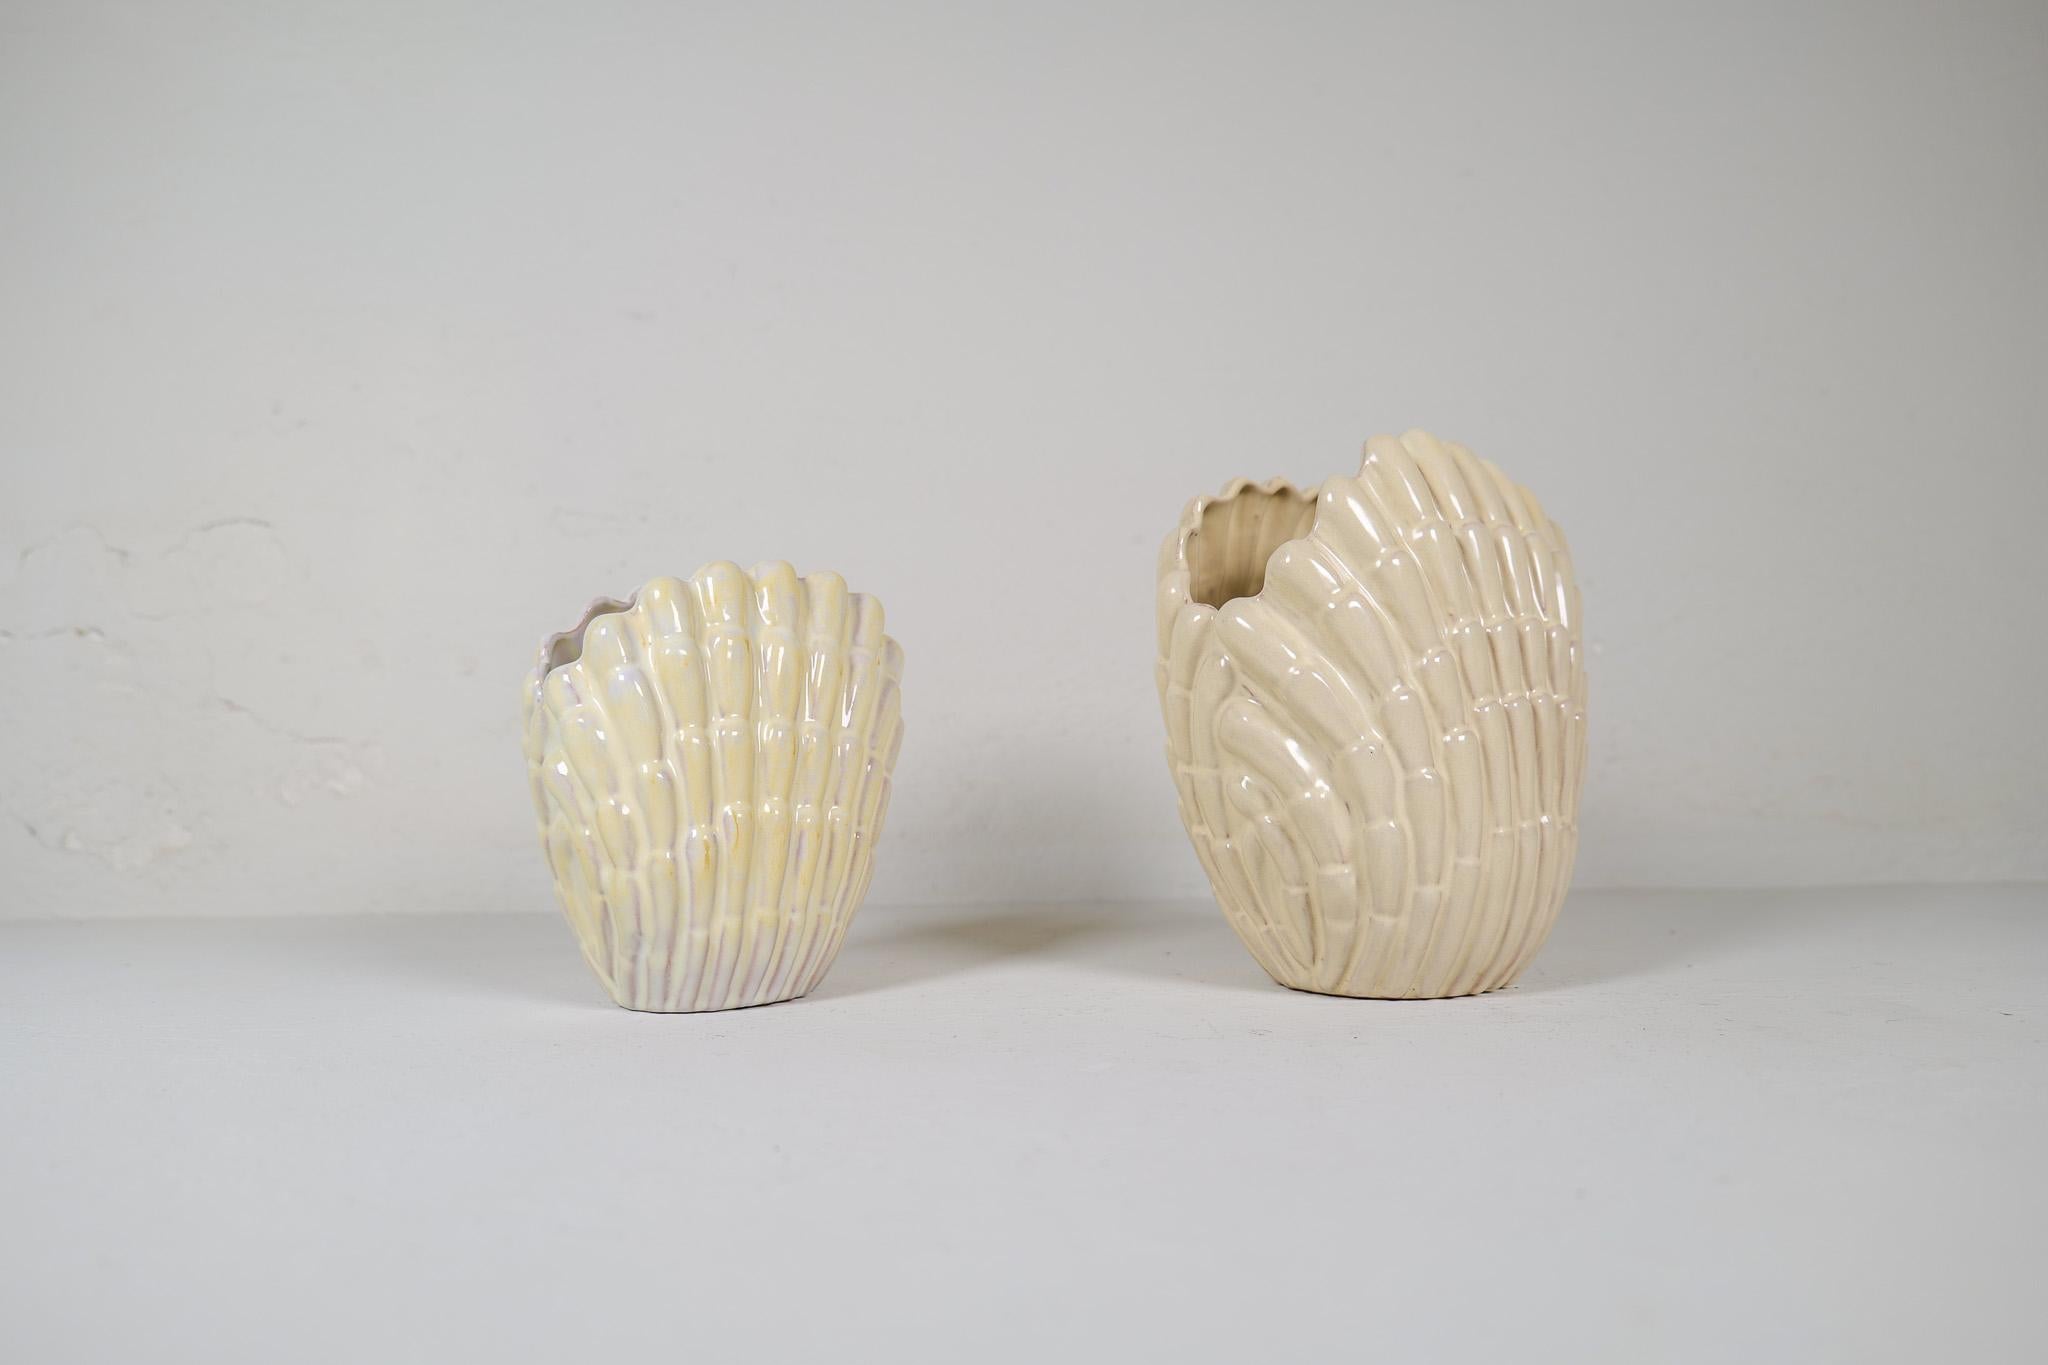 Mid-20th Century Midcentury Modern Pair of Seashell Vases by Vicke Lindstrand , Sweden For Sale